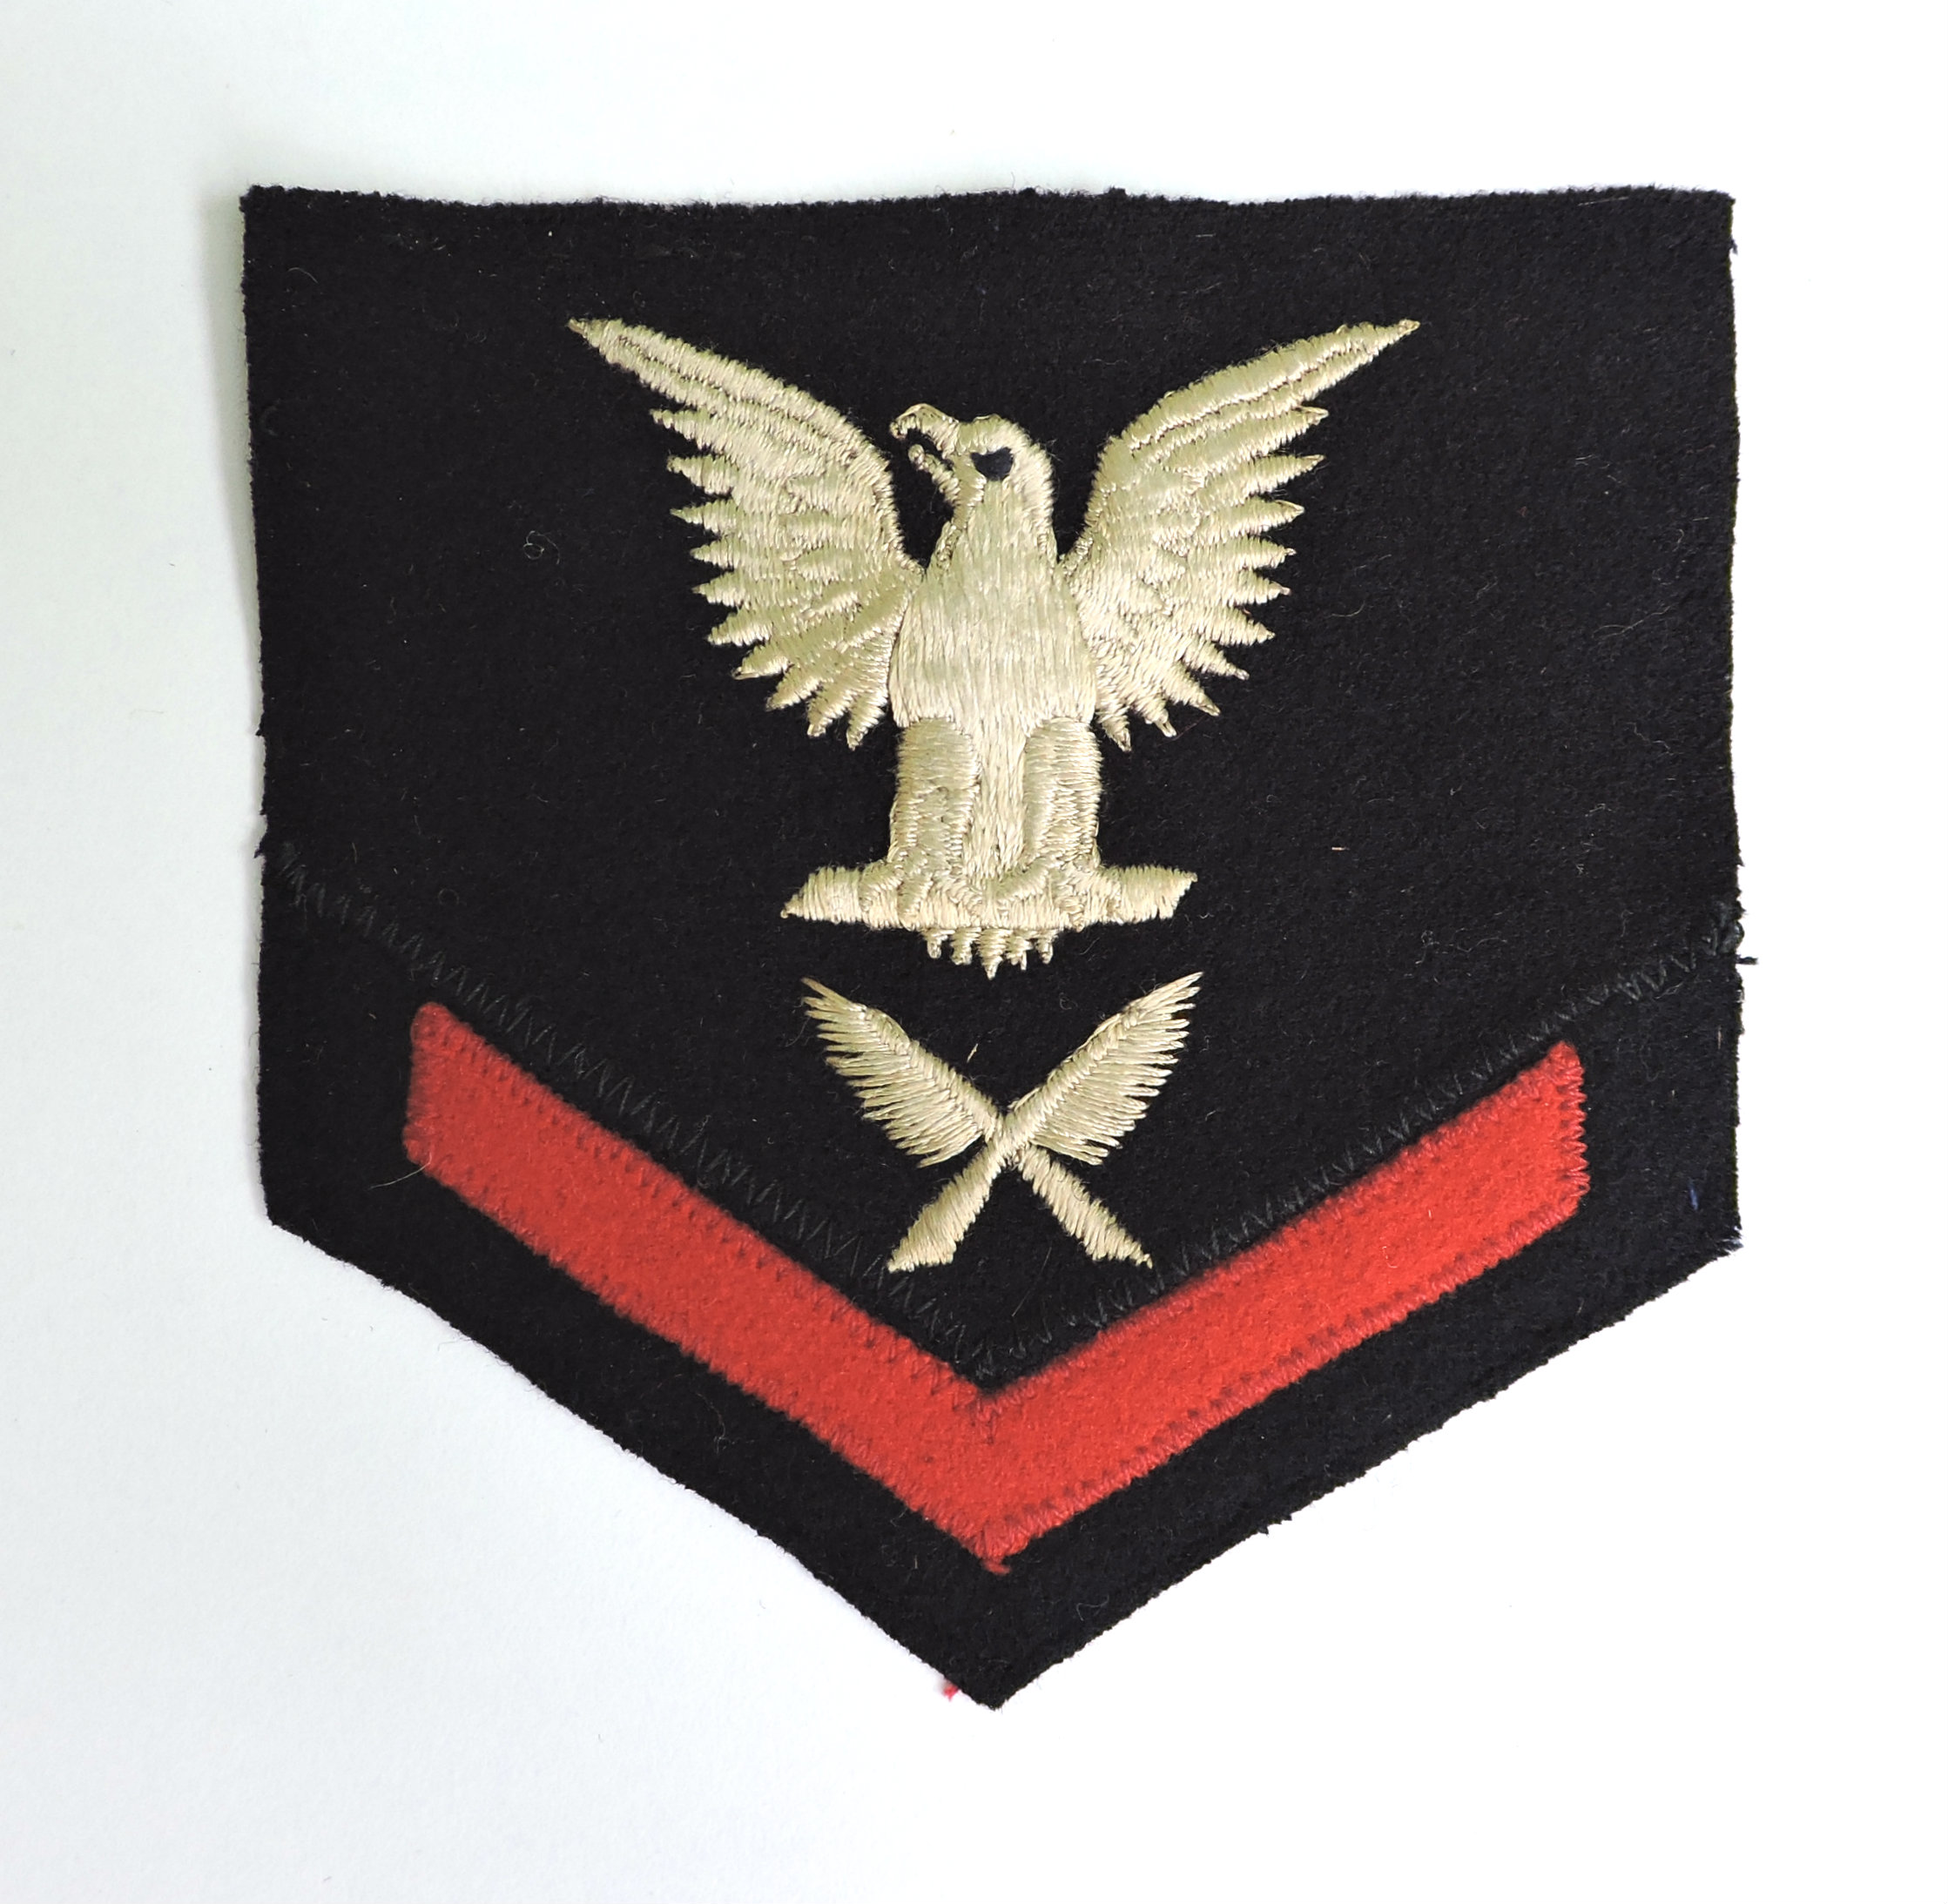 Sleeve rate Petty Officer 3rd class E-4 Yeoman